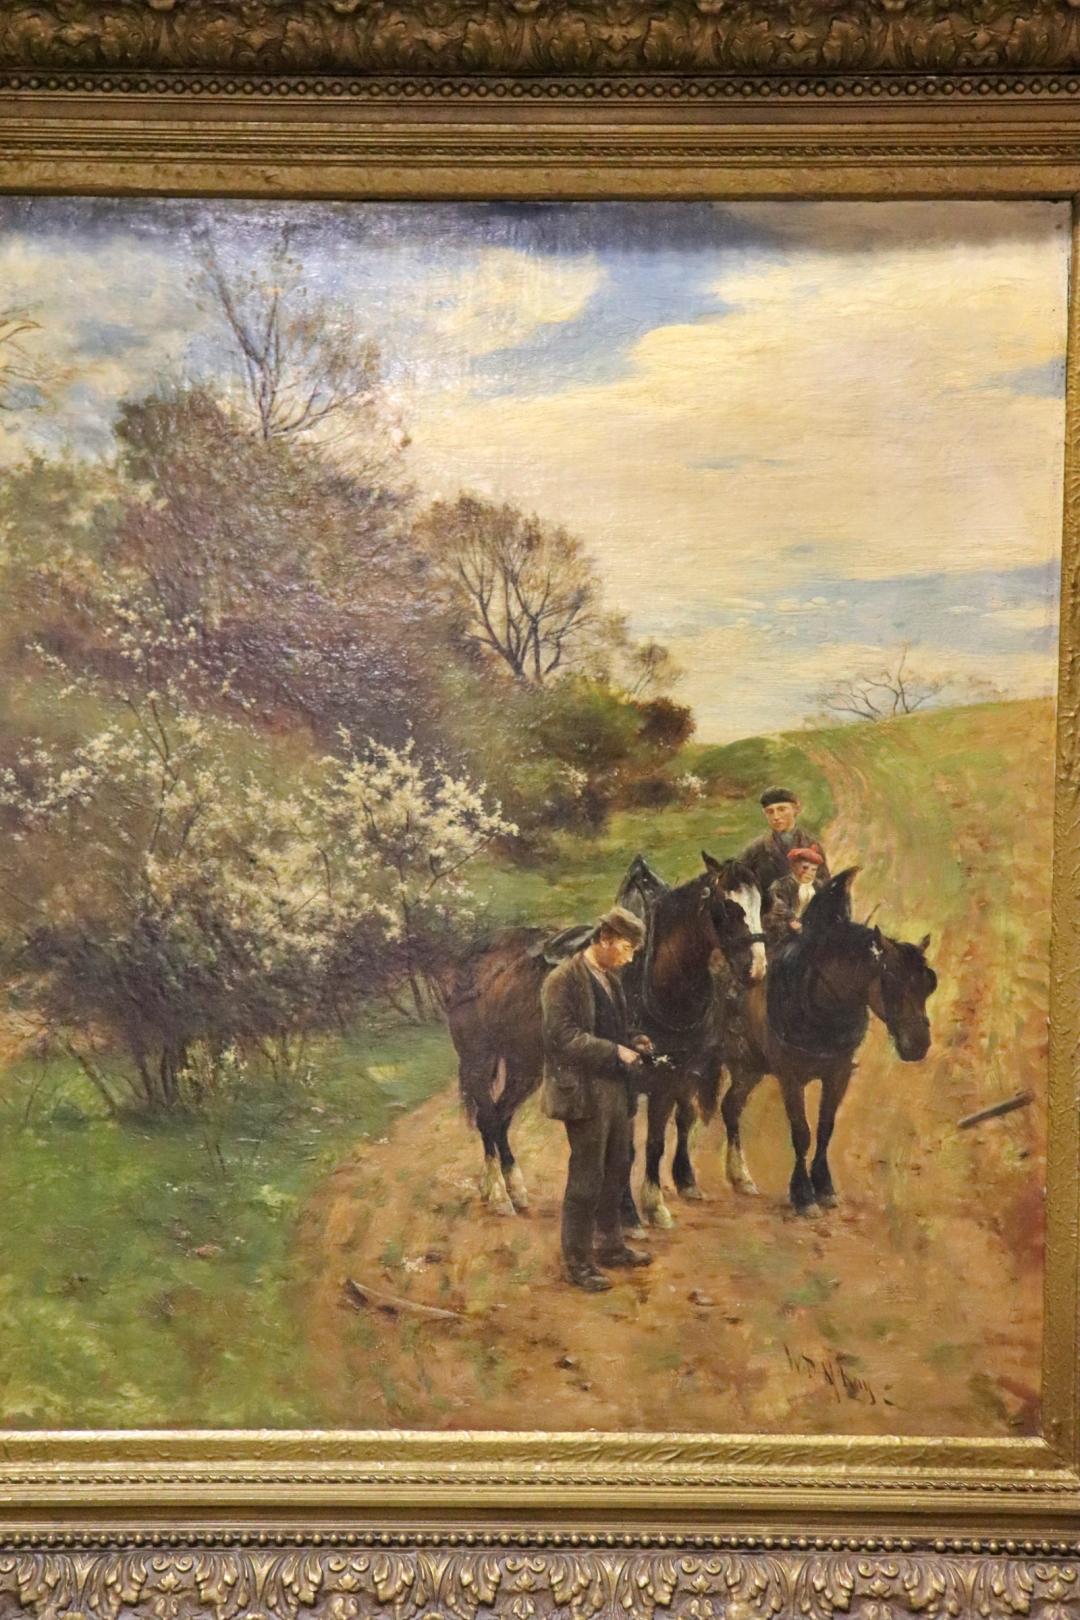 Figures on a country road with horses. Artist William Darling McKay (1844 - 1924). Scottish. the artist studied in Holland and was influenced by The Hague School. He is known for Scottish landscapes and depictions of rural life. His work is in the